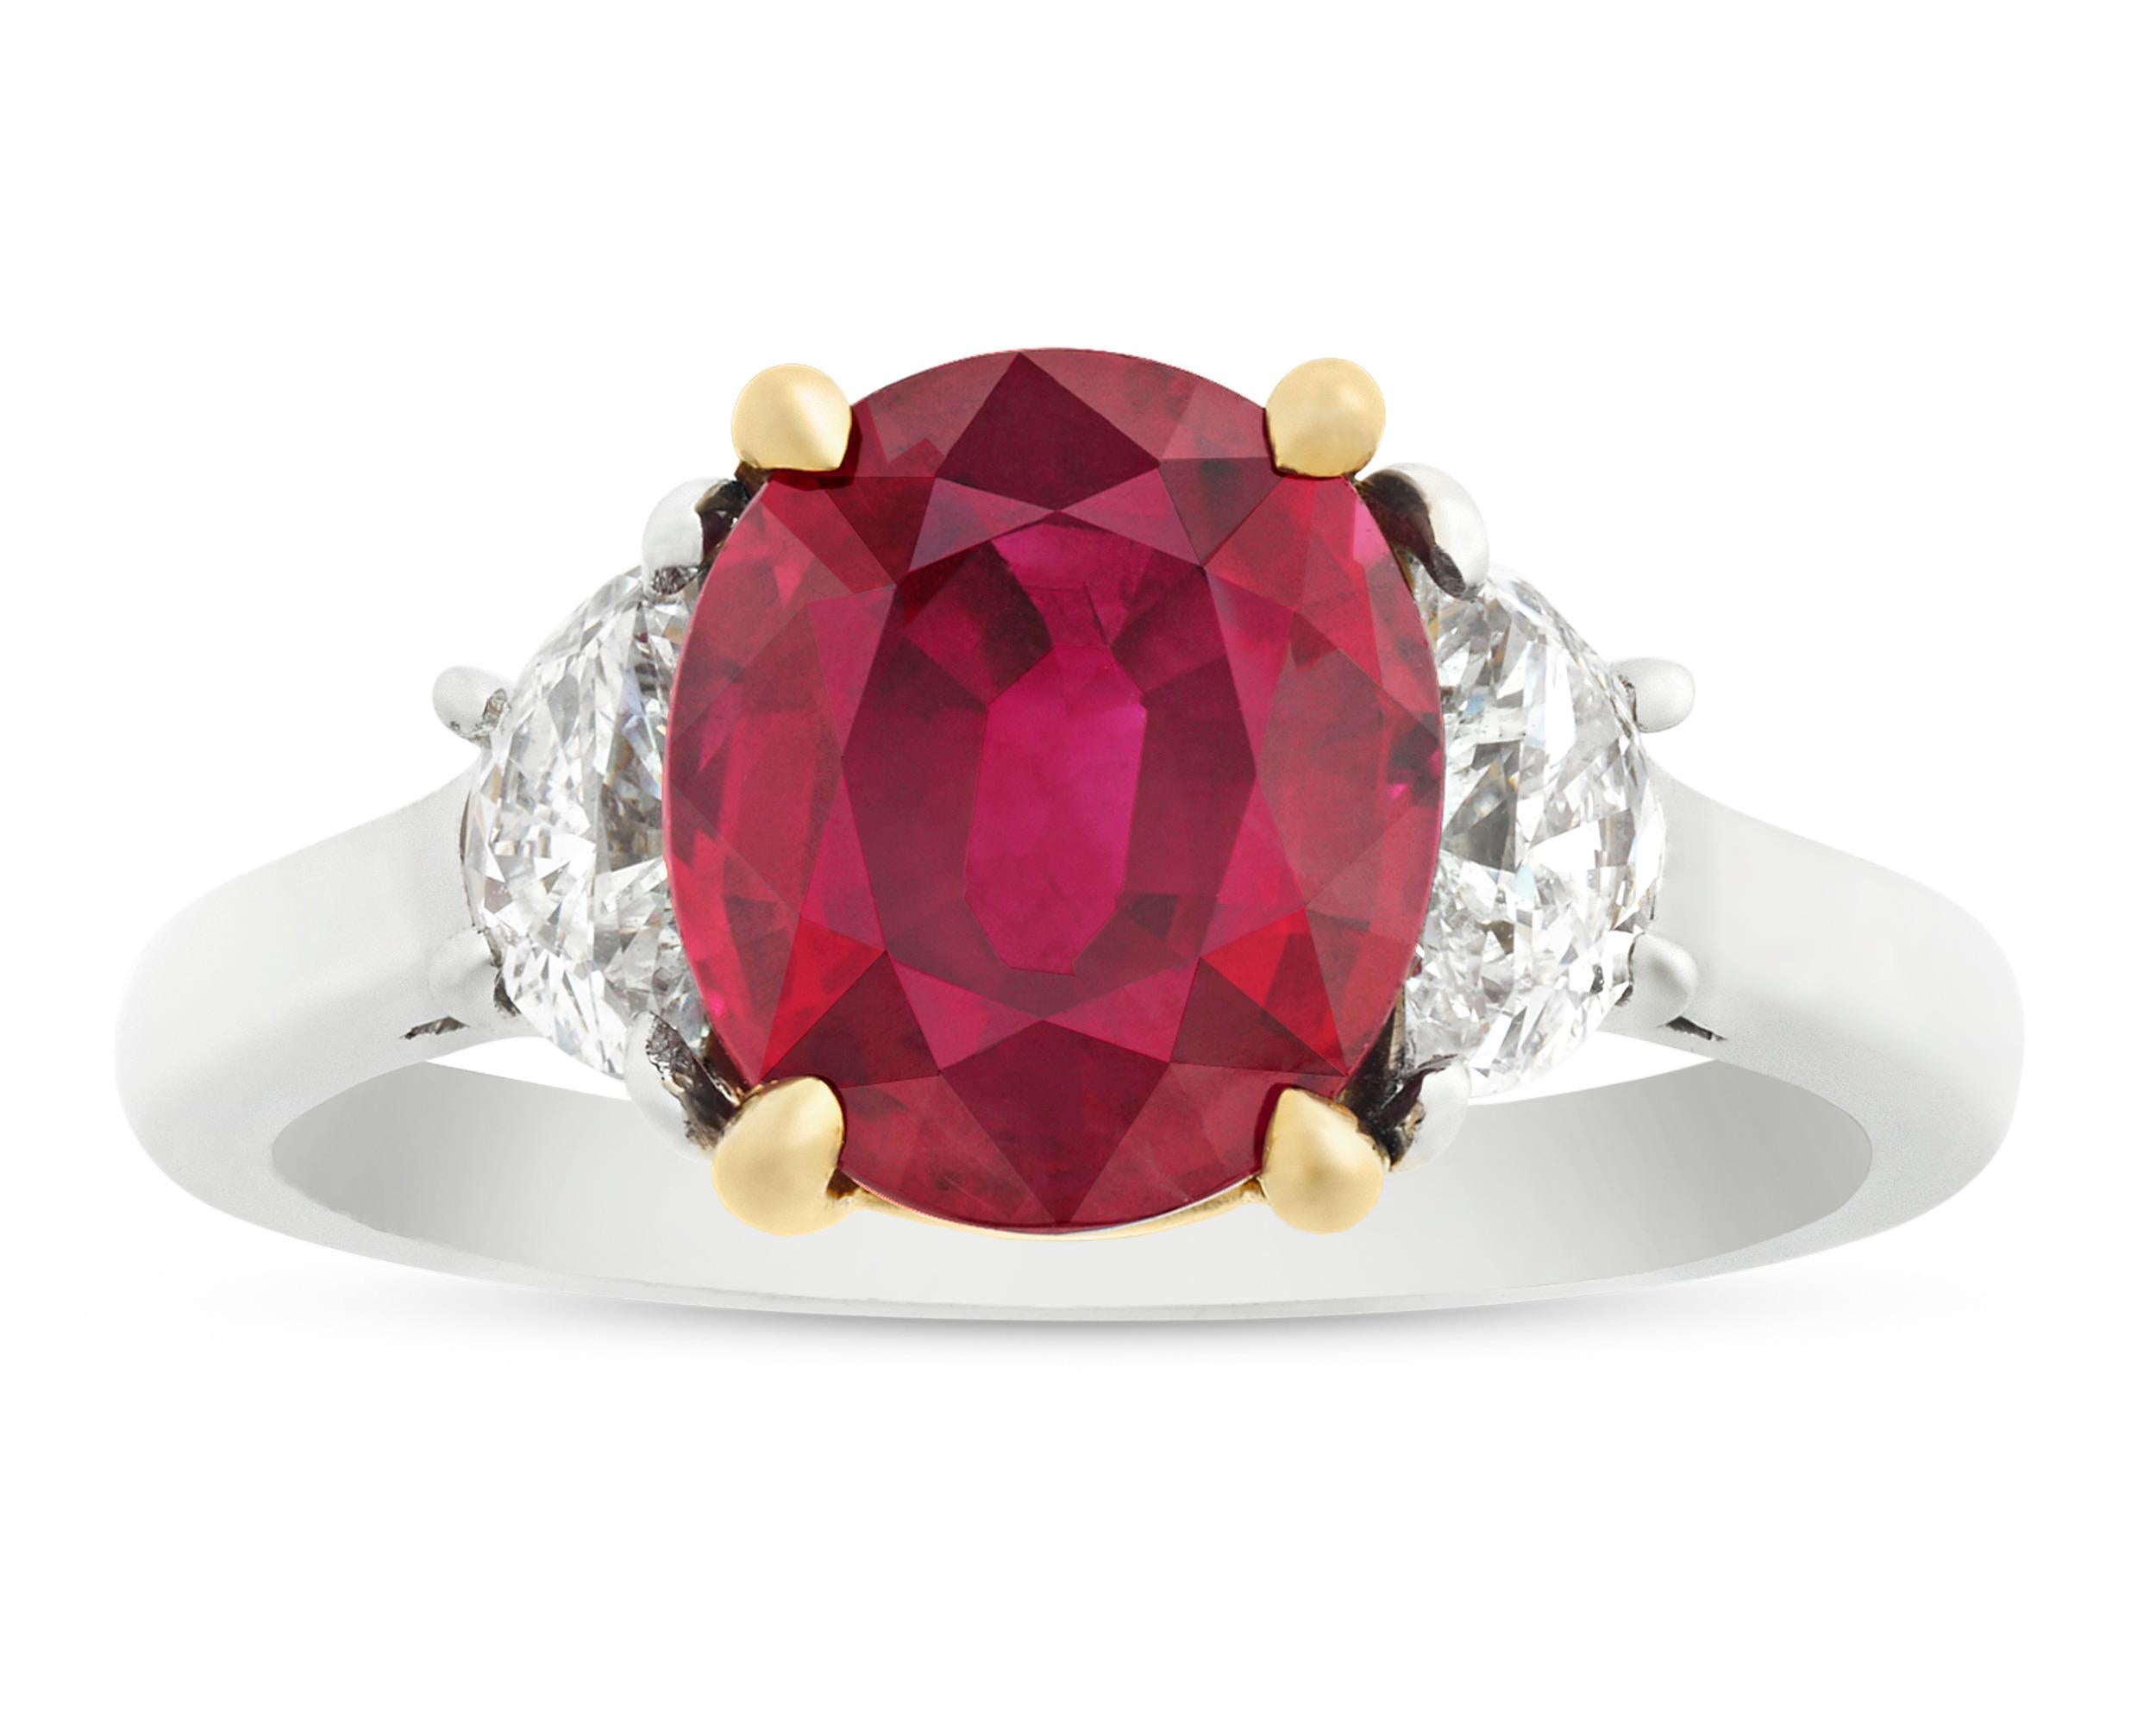 A 3.02-carat oval brilliant-cut Burma ruby exhibits a dramatic red hue in this classic ring. For centuries, the Burmese ruby has ranked among the most sought-after gemstones in the world, as stones that hail from these legendary mines are set apart